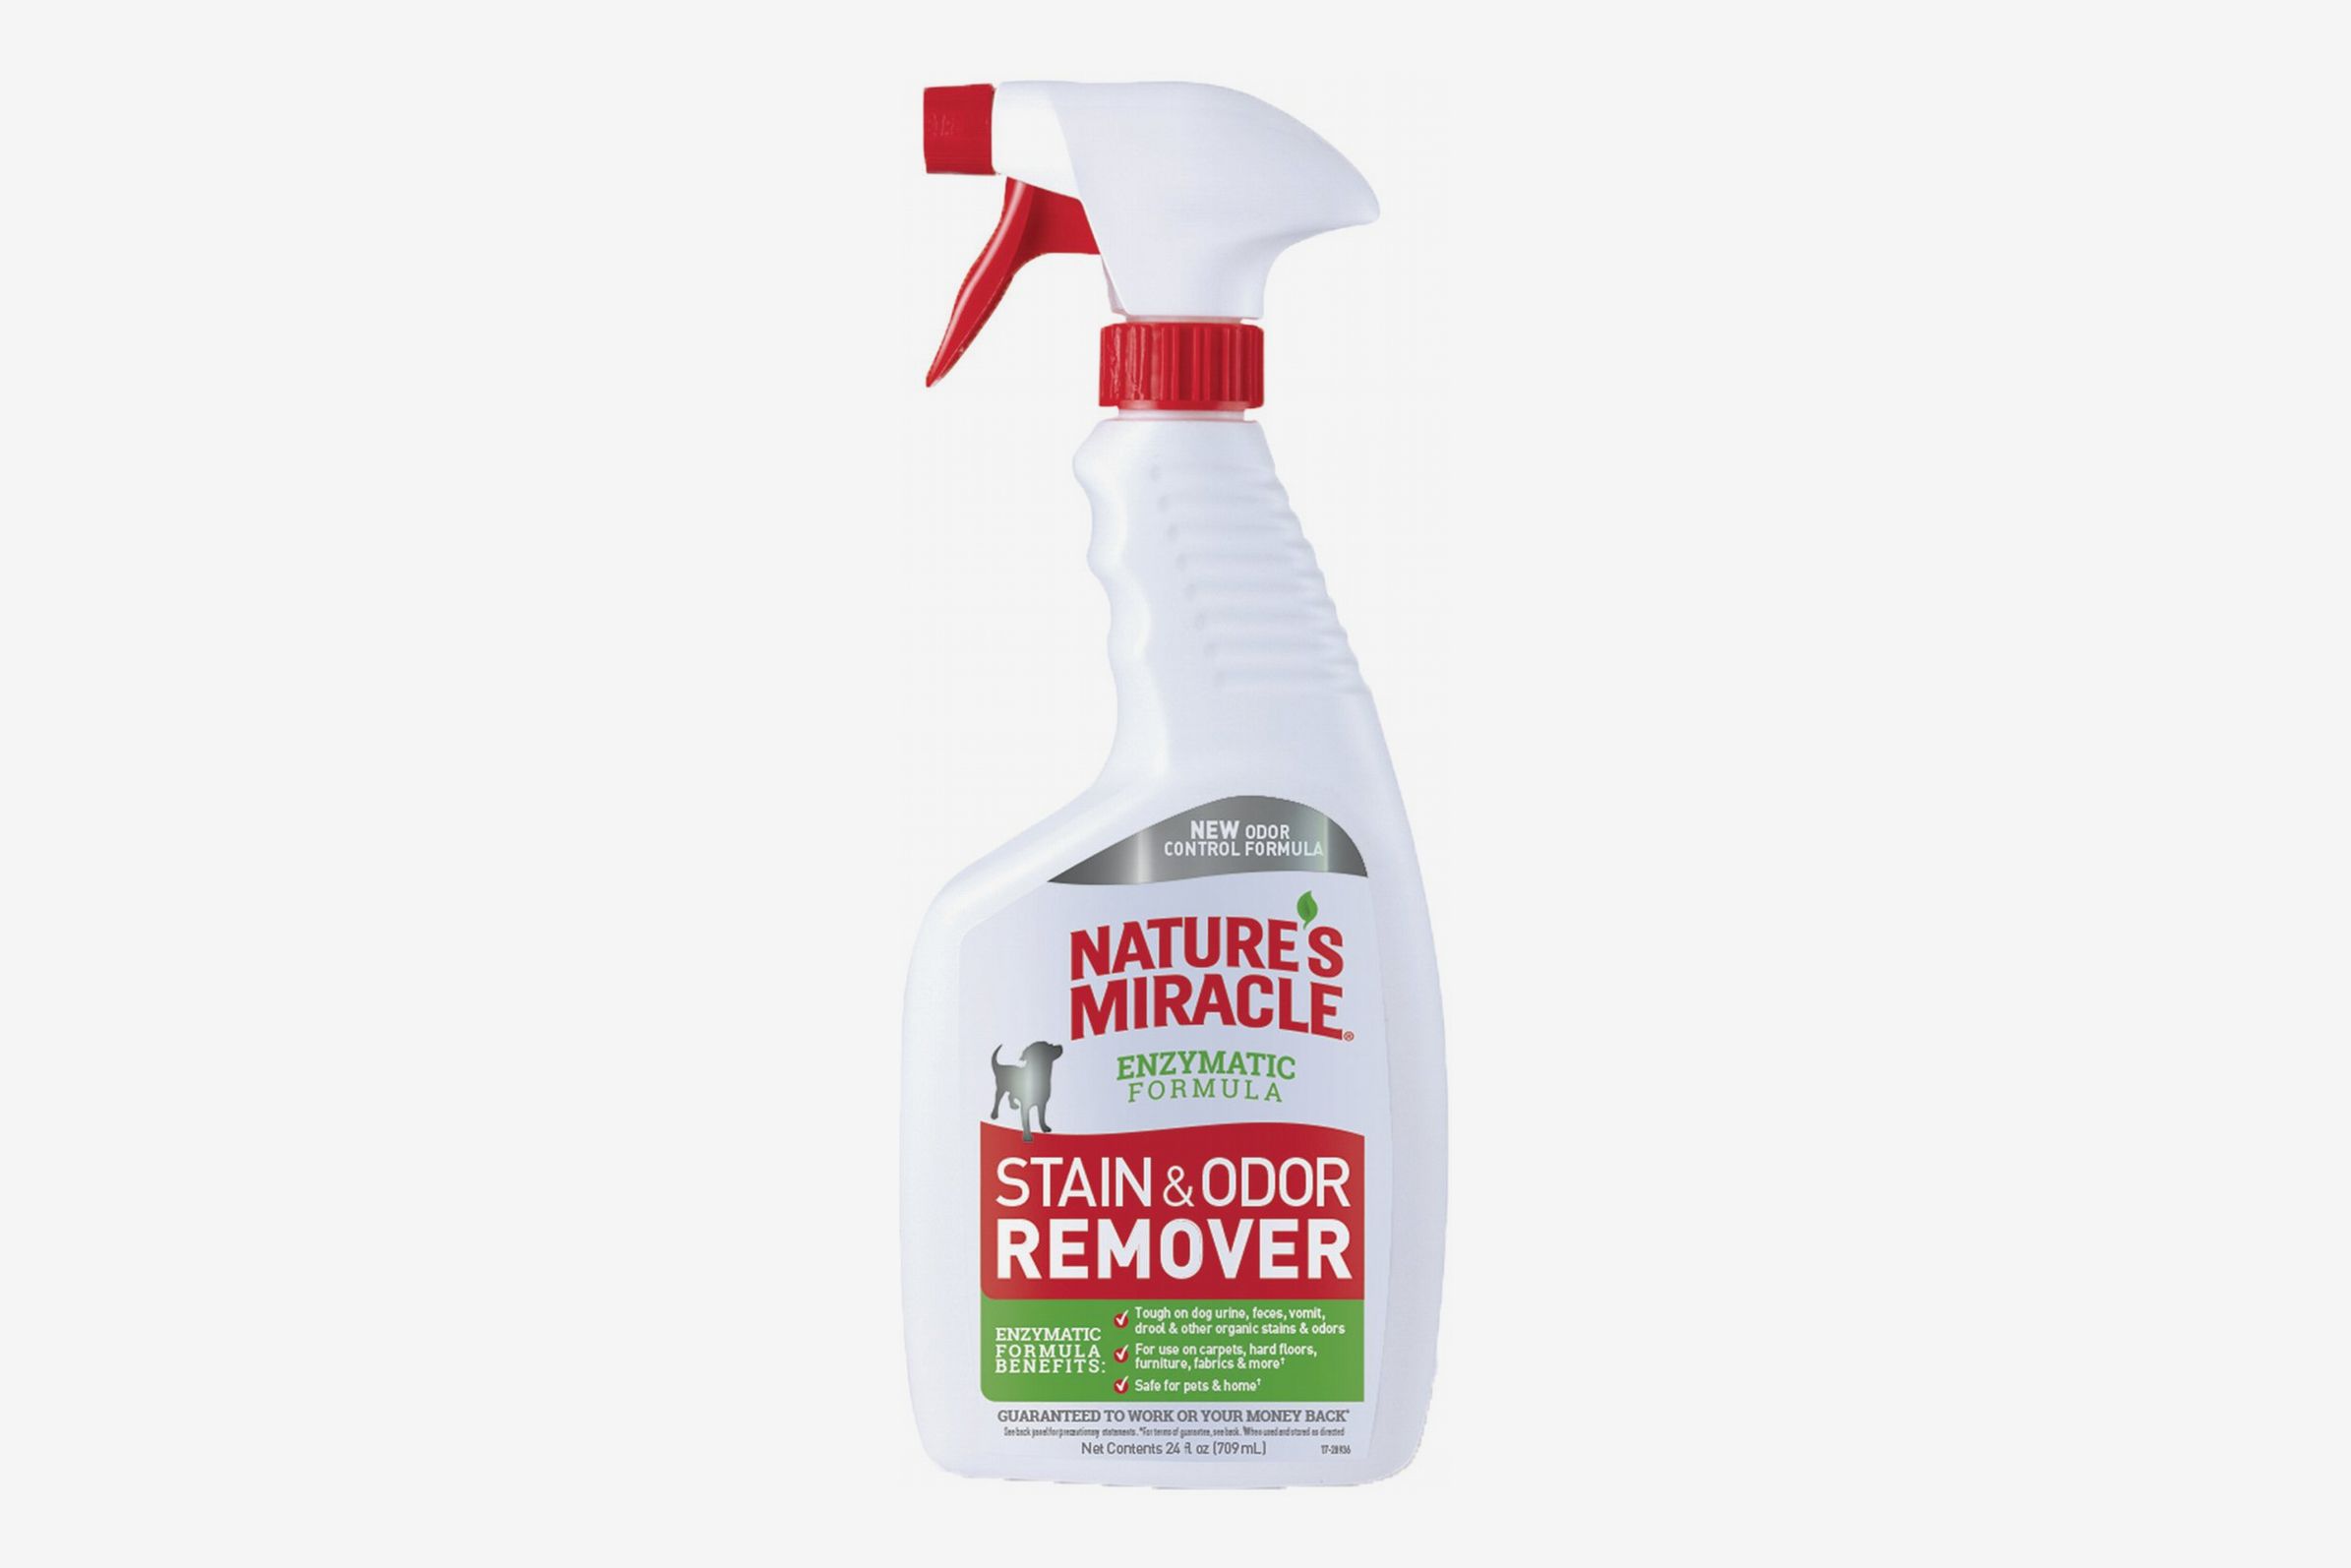 https://pyxis.nymag.com/v1/imgs/a4a/991/c6c9e3c66685a24e88293e74735c04436a-pet-stain-and-odor-remover.jpg